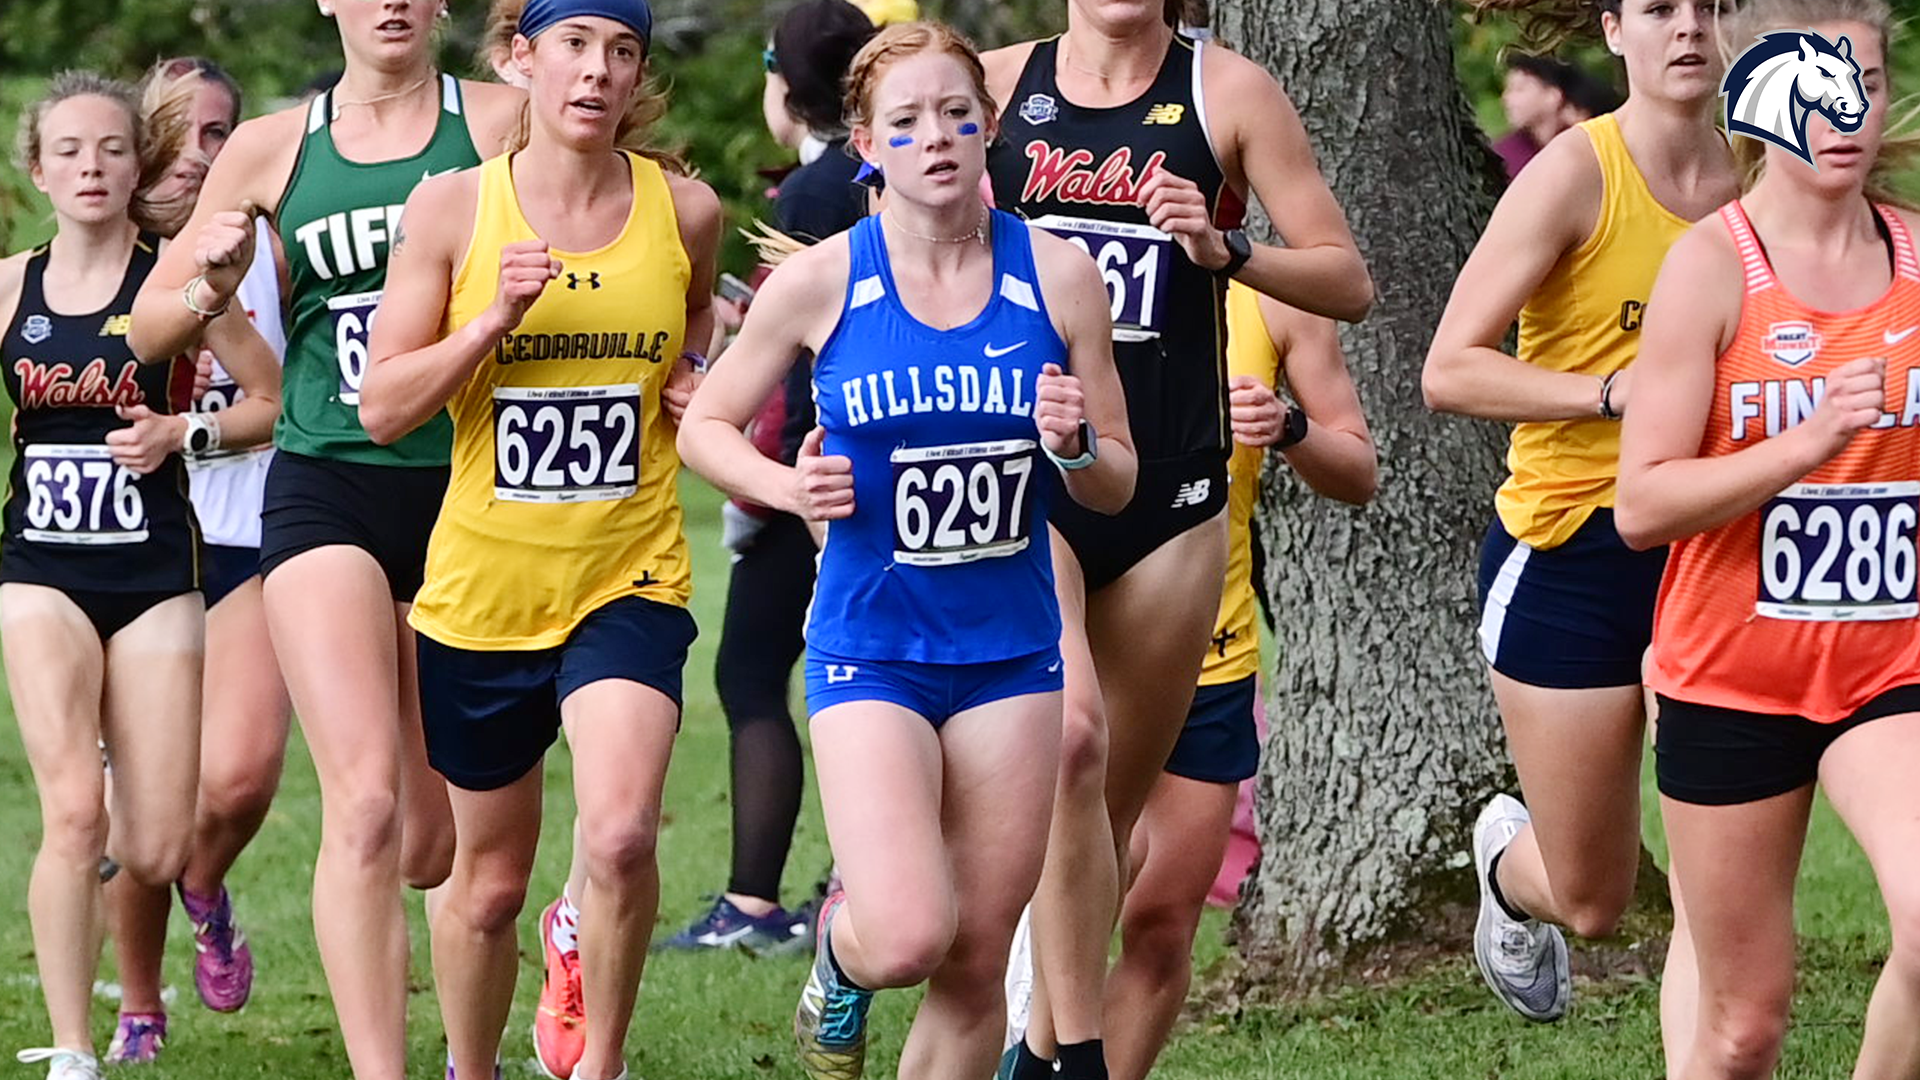 Charger women continue to impress with strong race in top division of Louisville XC Classic